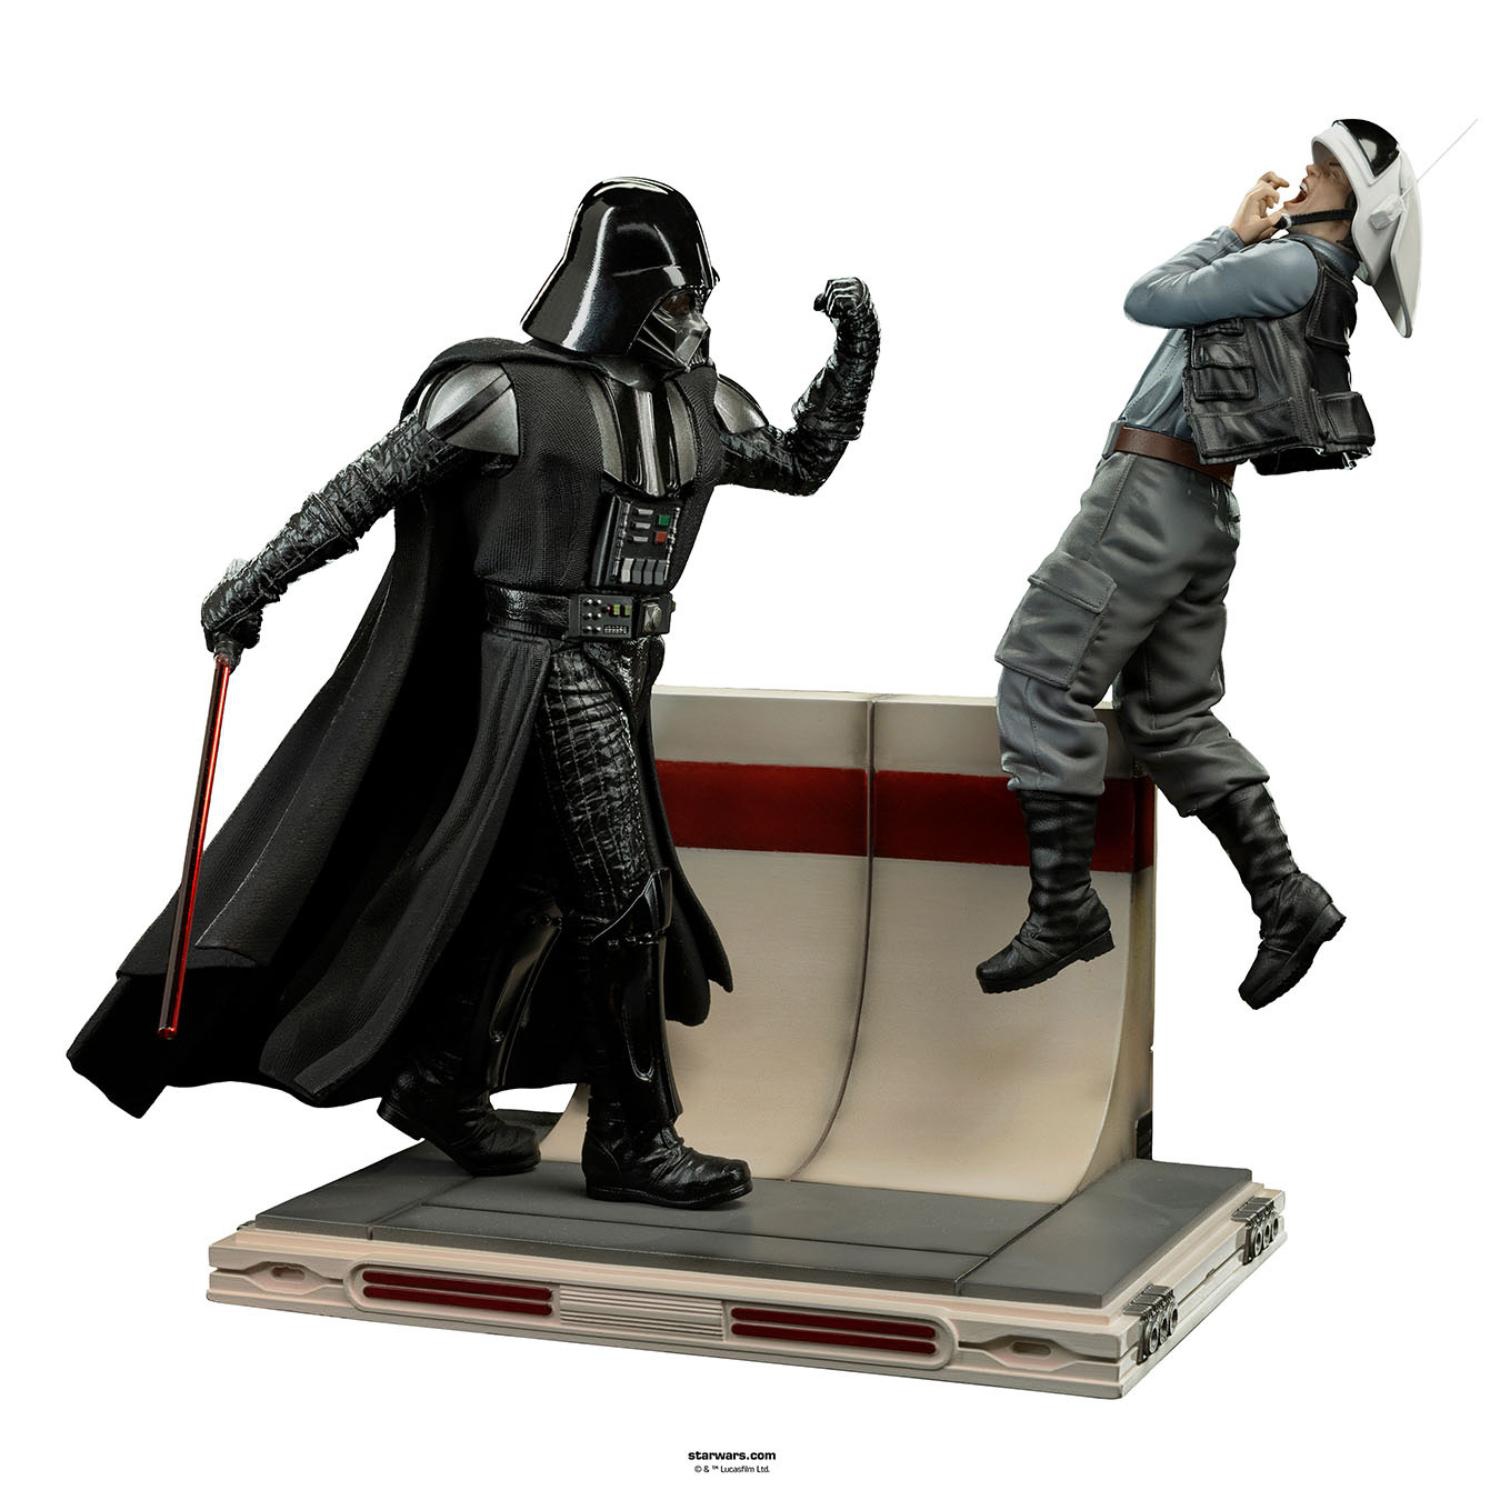 Star Wars - Darth Vader Deluxe - Star Wars Rogue One - Art Scale 1/10